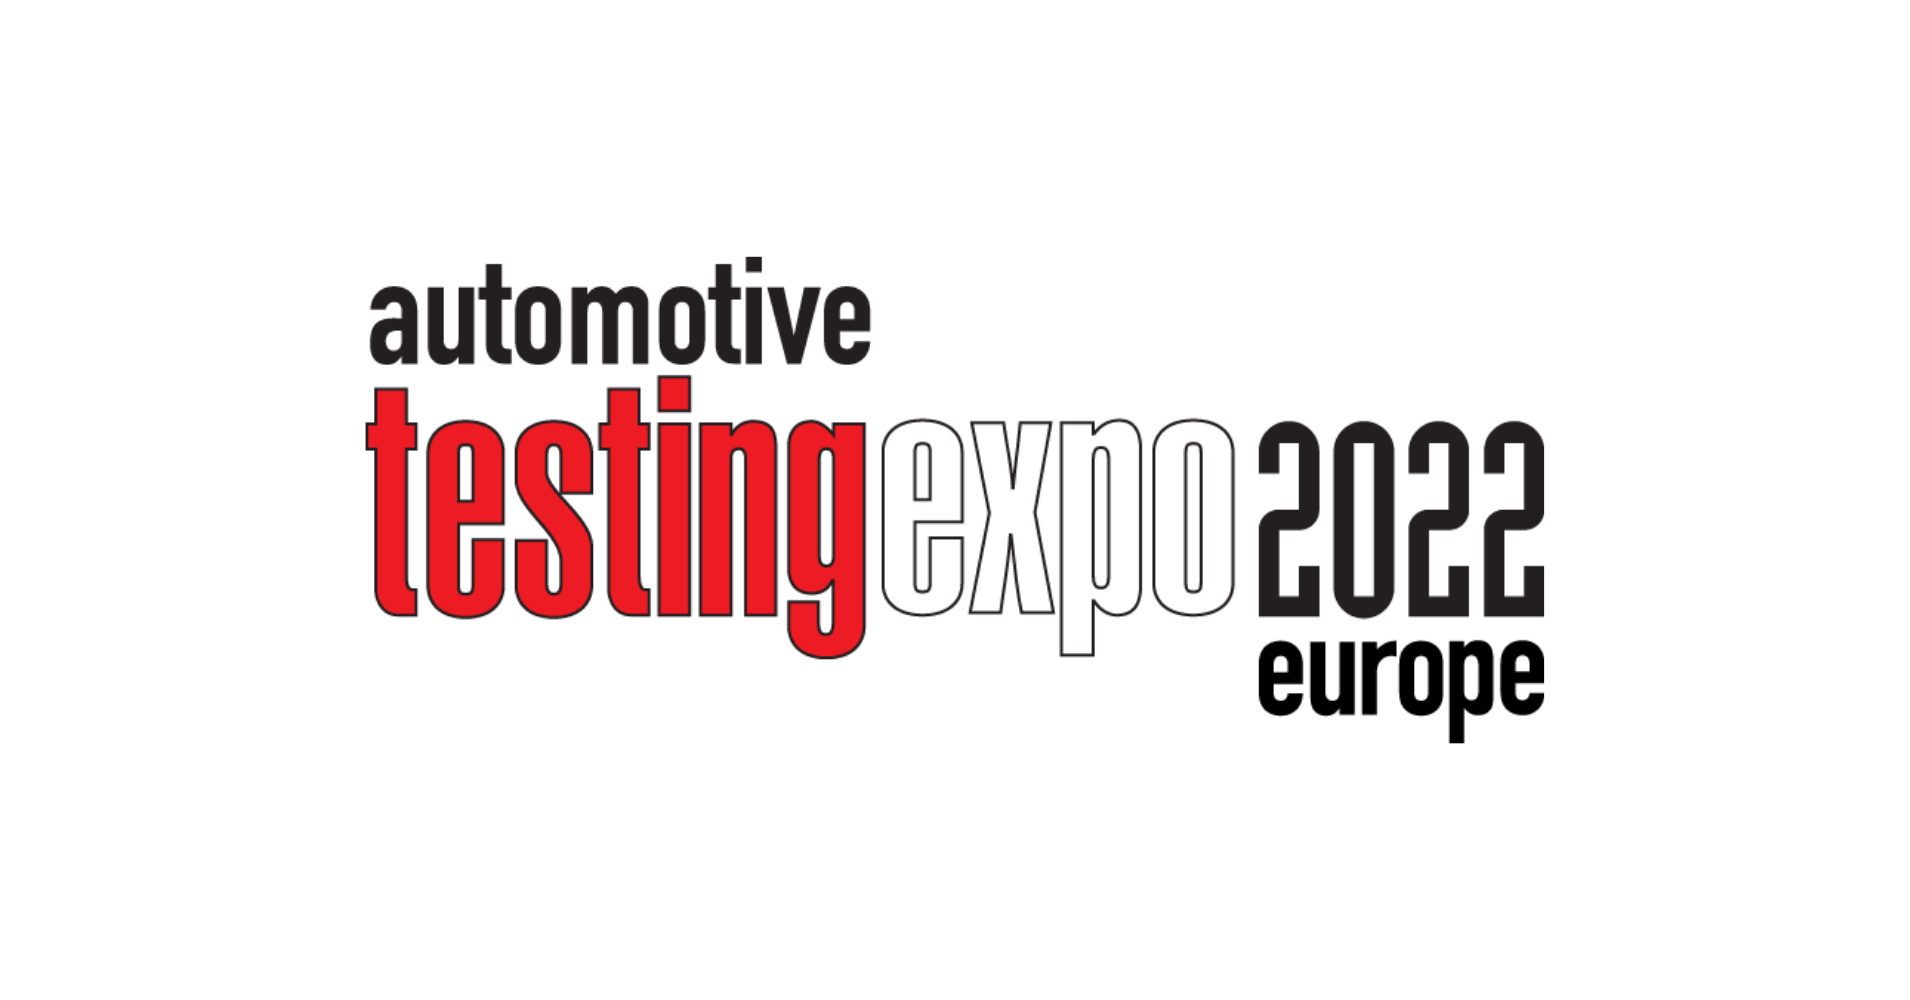 JOT Automation to exhibit at Automotive Testing Expo 2022